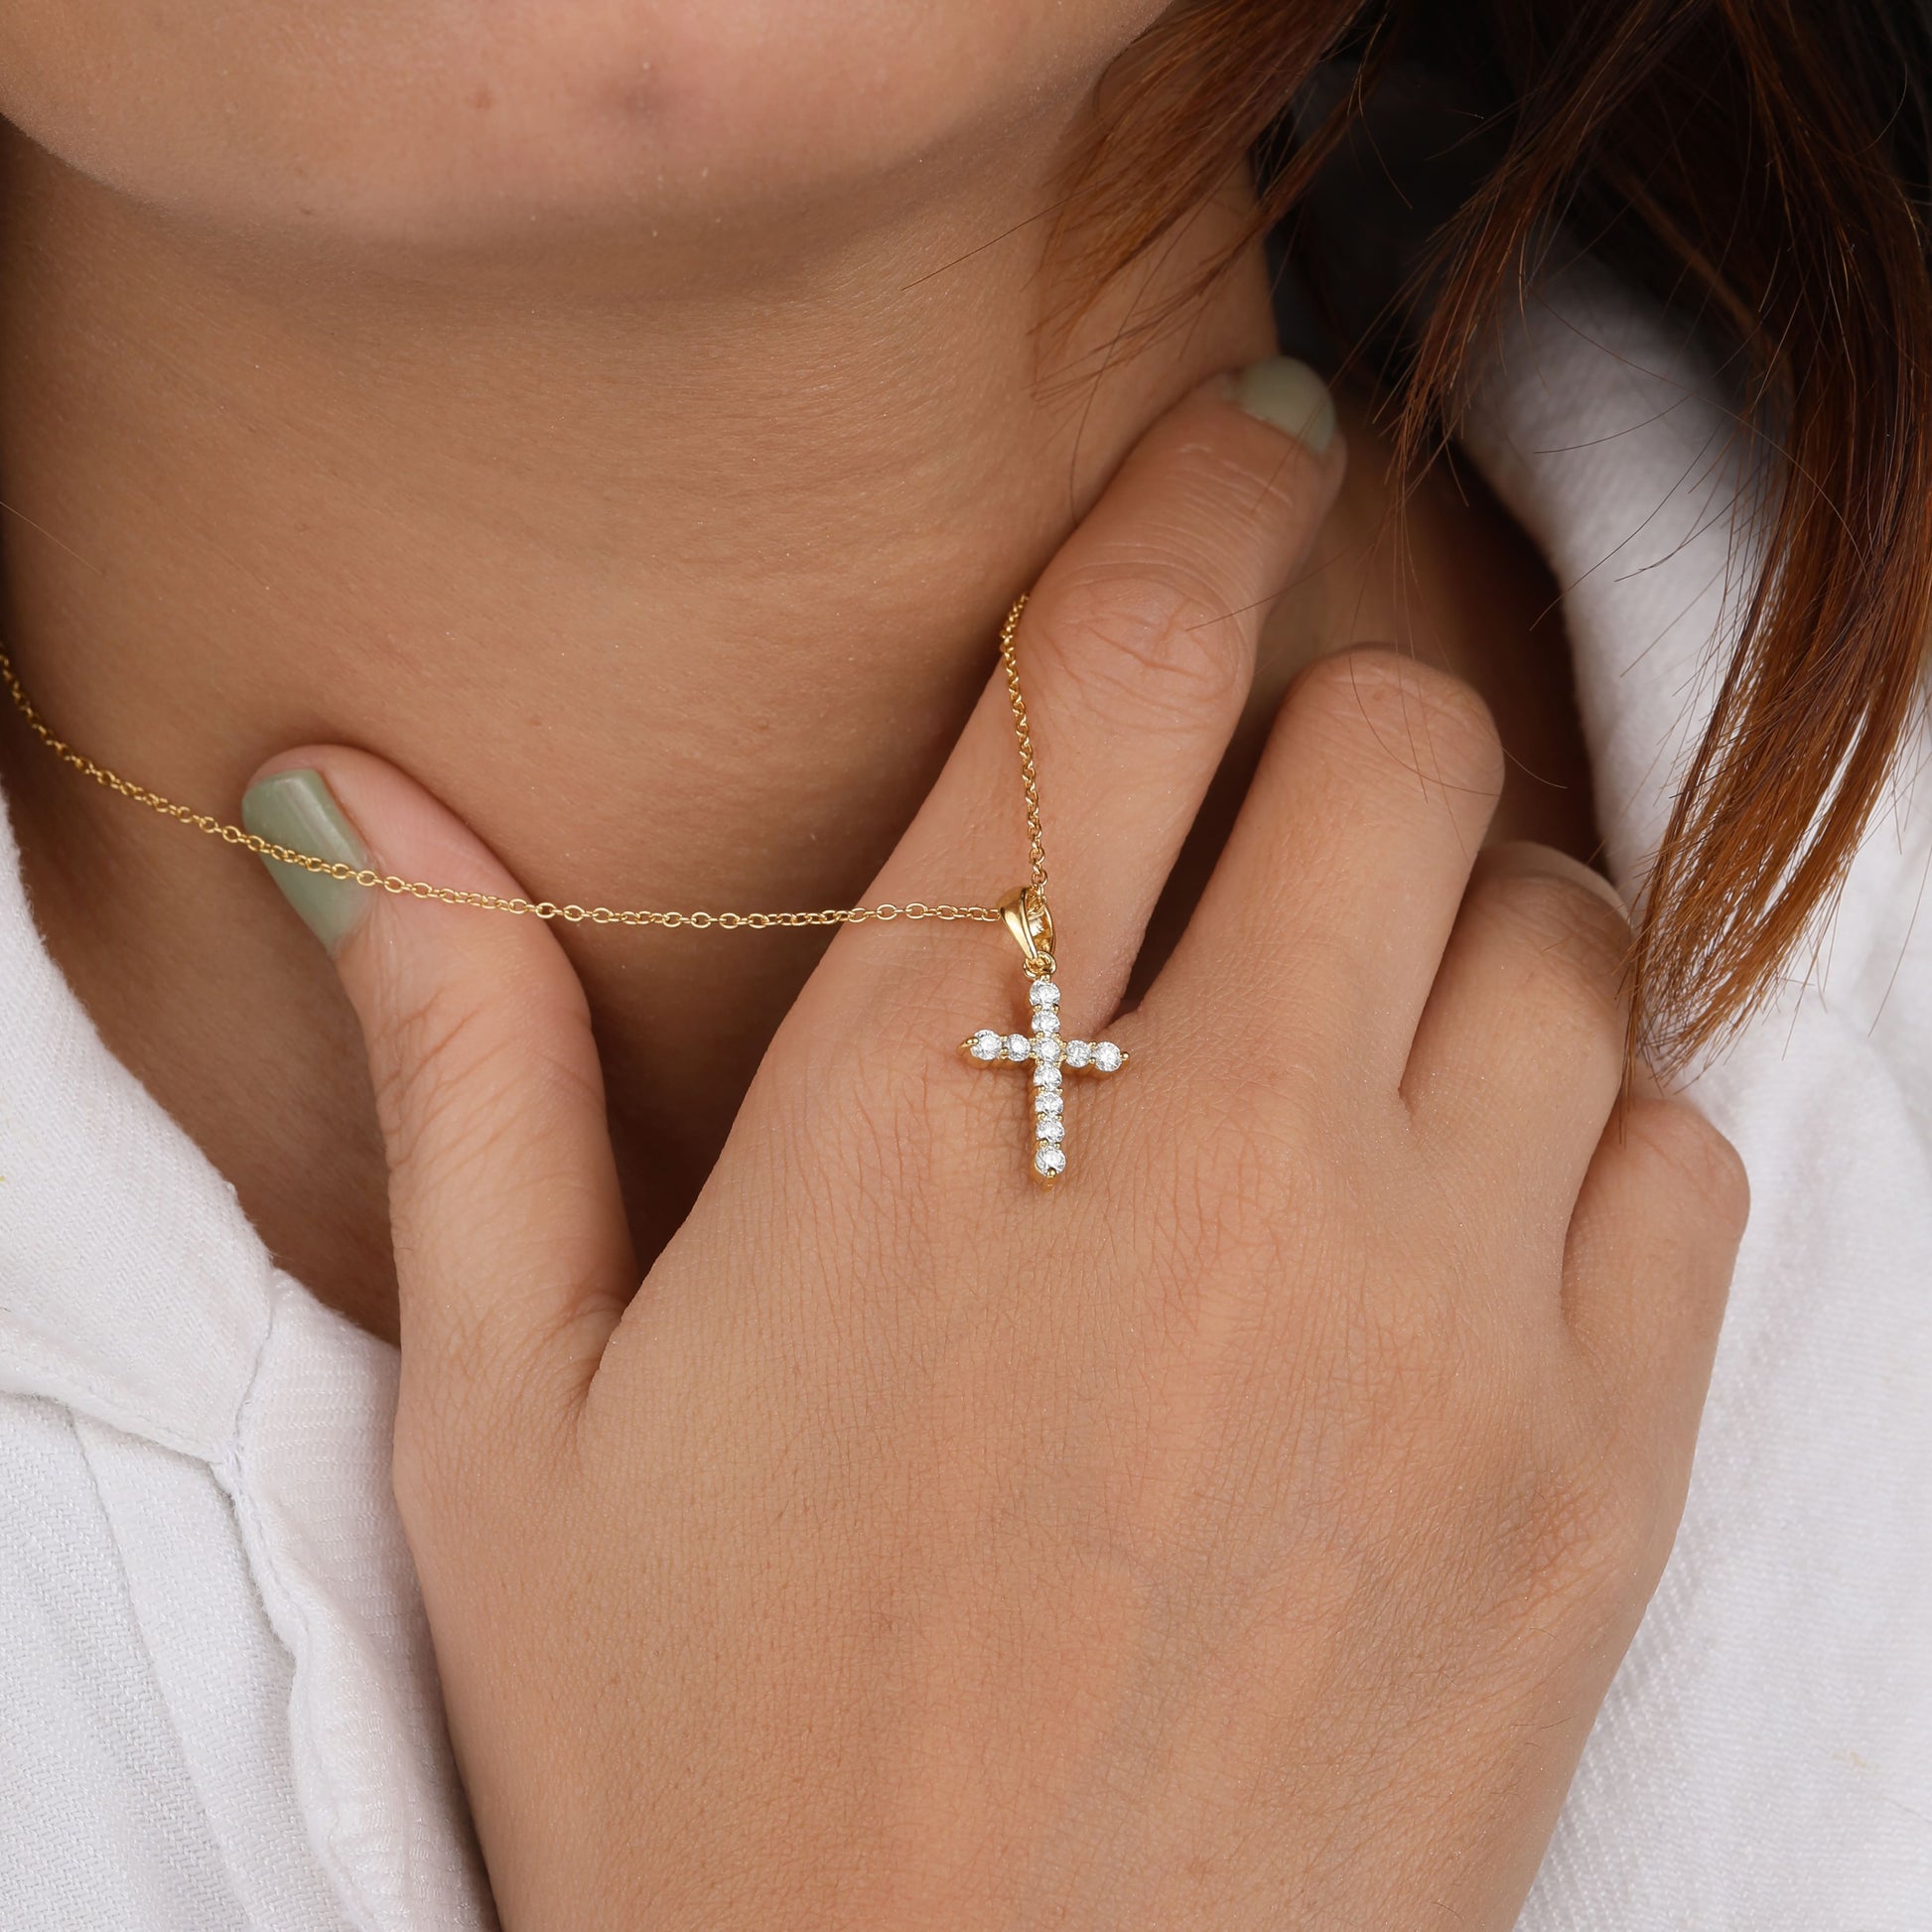  Cross Necklace for Women on model hand